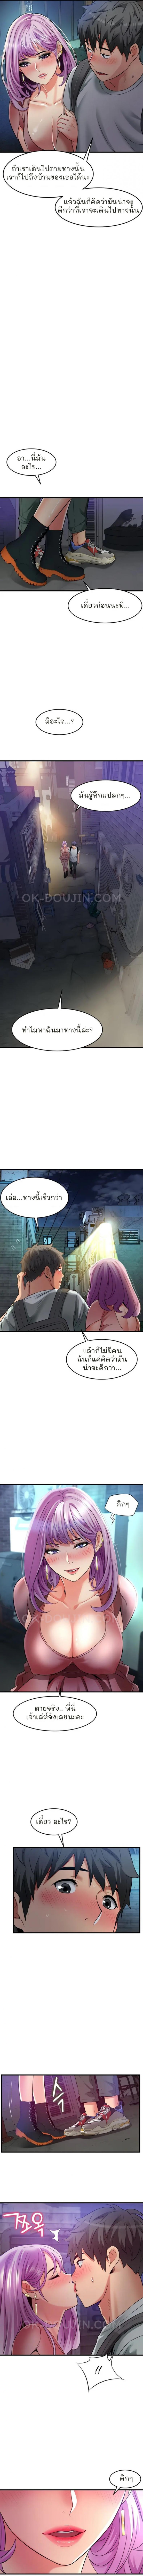 An Alley Story 22 ภาพที่ 7